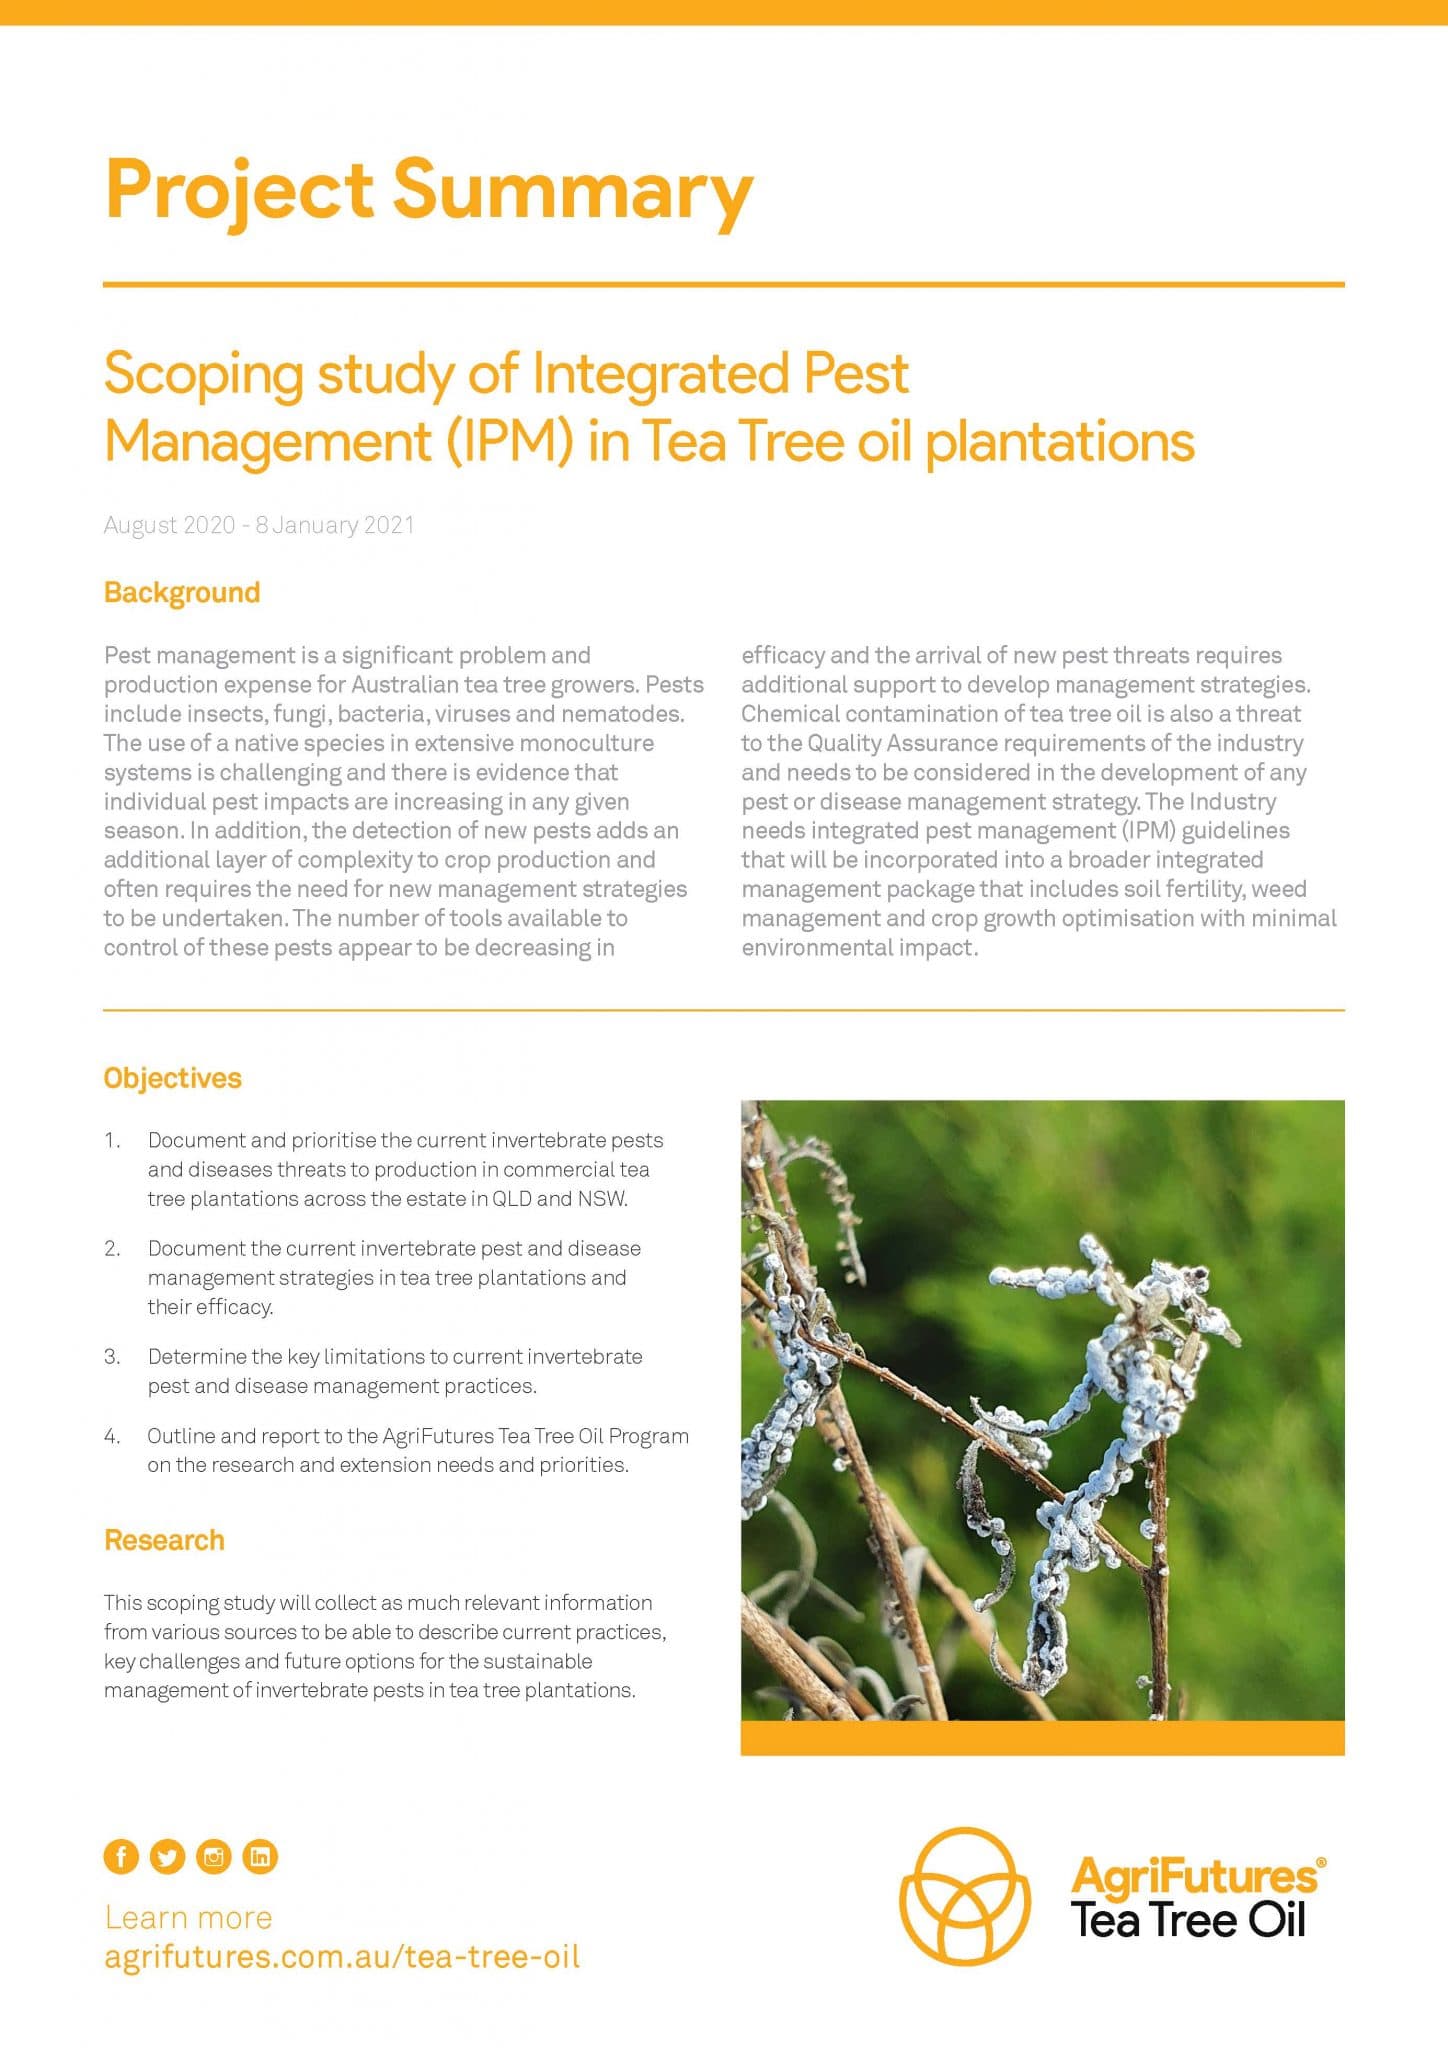 Project Summary: Scoping study of Integrated Pest Management (IPM) in tea tree oil plantations - image